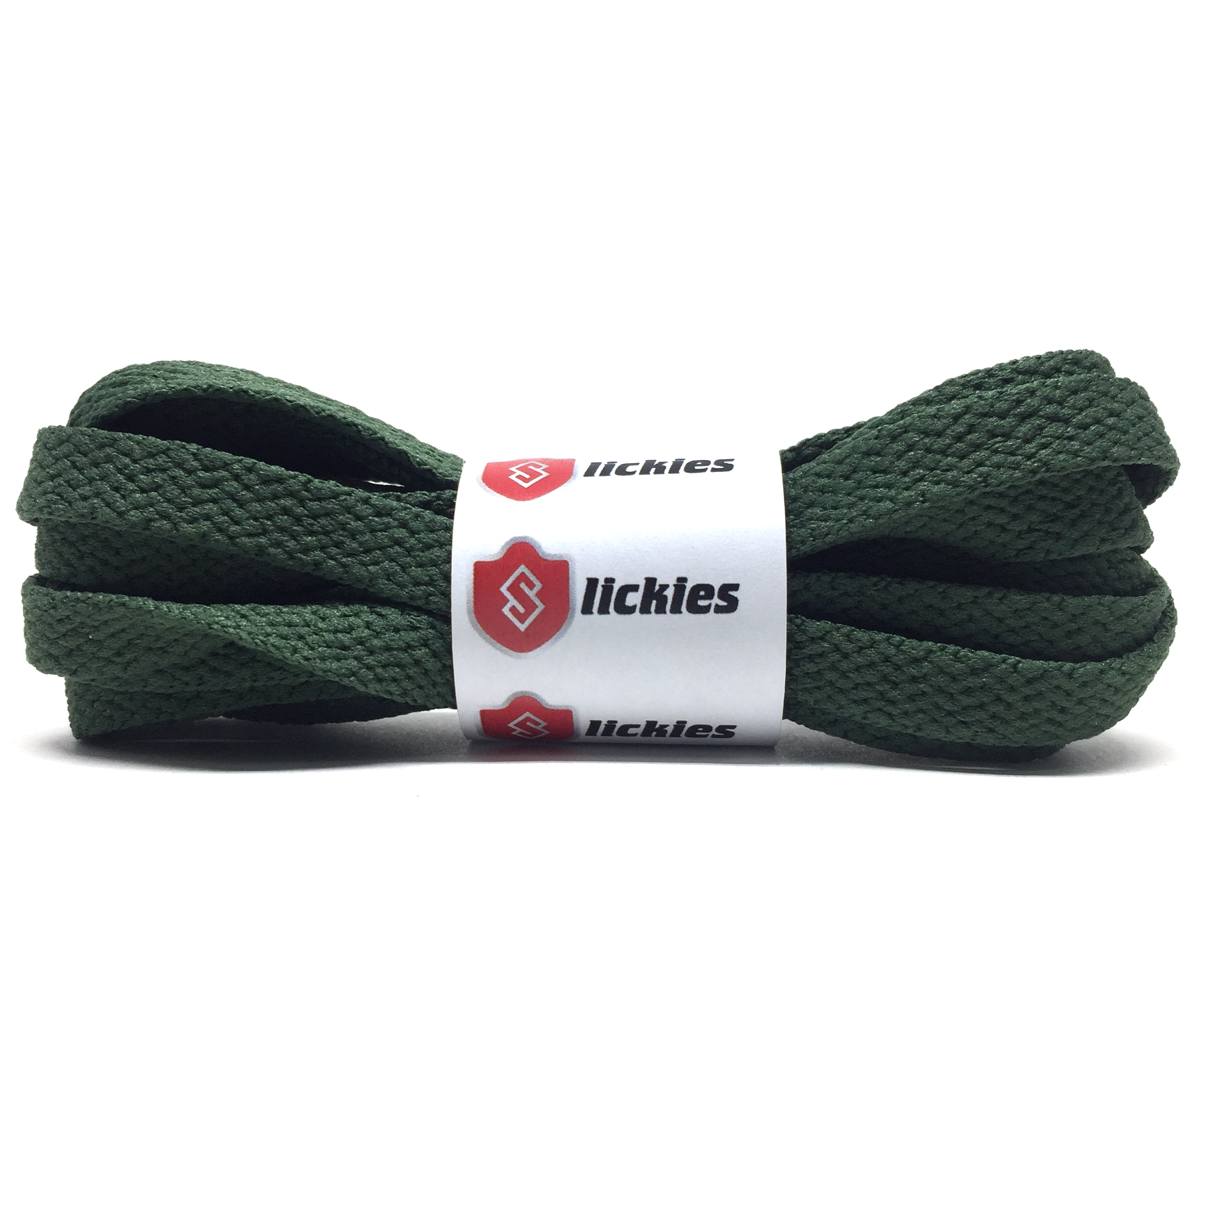 olive green shoelaces